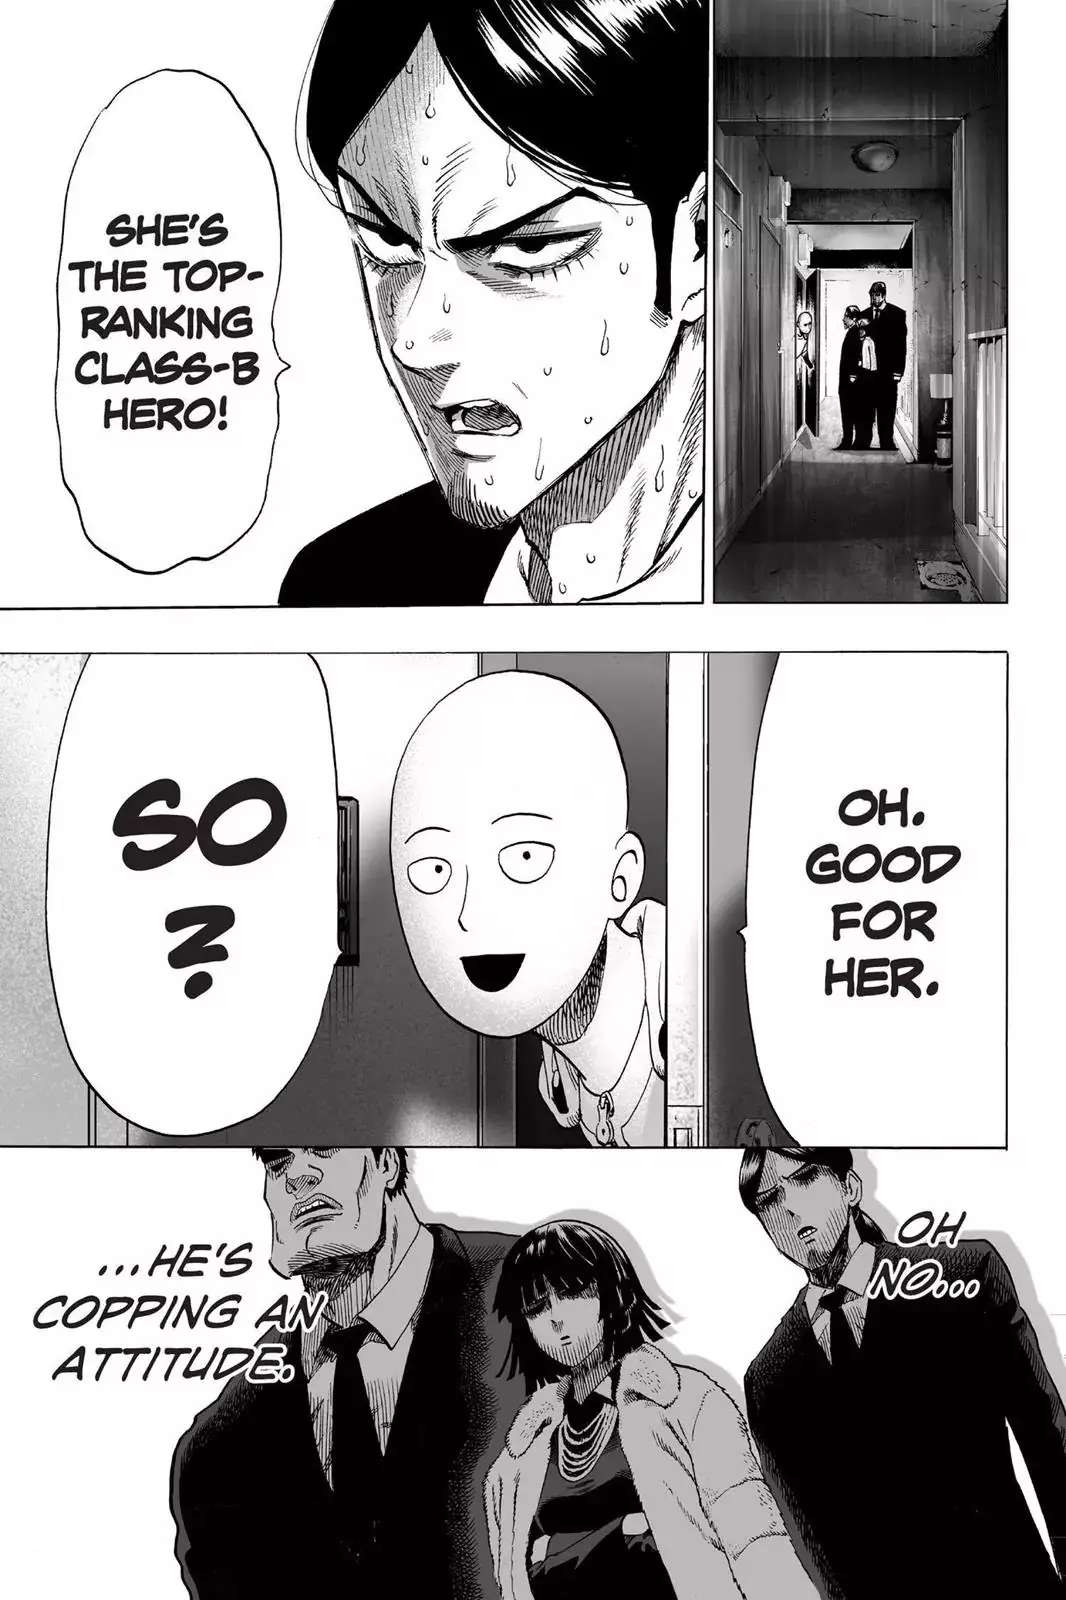 One Punch Man Chapter 42, READ One Punch Man Chapter 42 ONLINE, lost in the cloud genre,lost in the cloud gif,lost in the cloud girl,lost in the cloud goods,lost in the cloud goodreads,lost in the cloud,lost ark cloud gaming,lost odyssey cloud gaming,lost in the cloud fanart,lost in the cloud fanfic,lost in the cloud fandom,lost in the cloud first kiss,lost in the cloud font,lost in the cloud ending,lost in the cloud episode 97,lost in the cloud edit,lost in the cloud explained,lost in the cloud dog,lost in the cloud discord server,lost in the cloud desktop wallpaper,lost in the cloud drawing,can't find my cloud on network,lost in the cloud characters,lost in the cloud chapter 93 release date,lost in the cloud birthday,lost in the cloud birthday art,lost in the cloud background,lost in the cloud banner,lost in the clouds meaning,what is the black cloud in lost,lost in the cloud ao3,lost in the cloud anime,lost in the cloud art,lost in the cloud author twitter,lost in the cloud author instagram,lost in the cloud artist,lost in the cloud acrylic stand,lost in the cloud artist twitter,lost in the cloud art style,lost in the cloud analysis